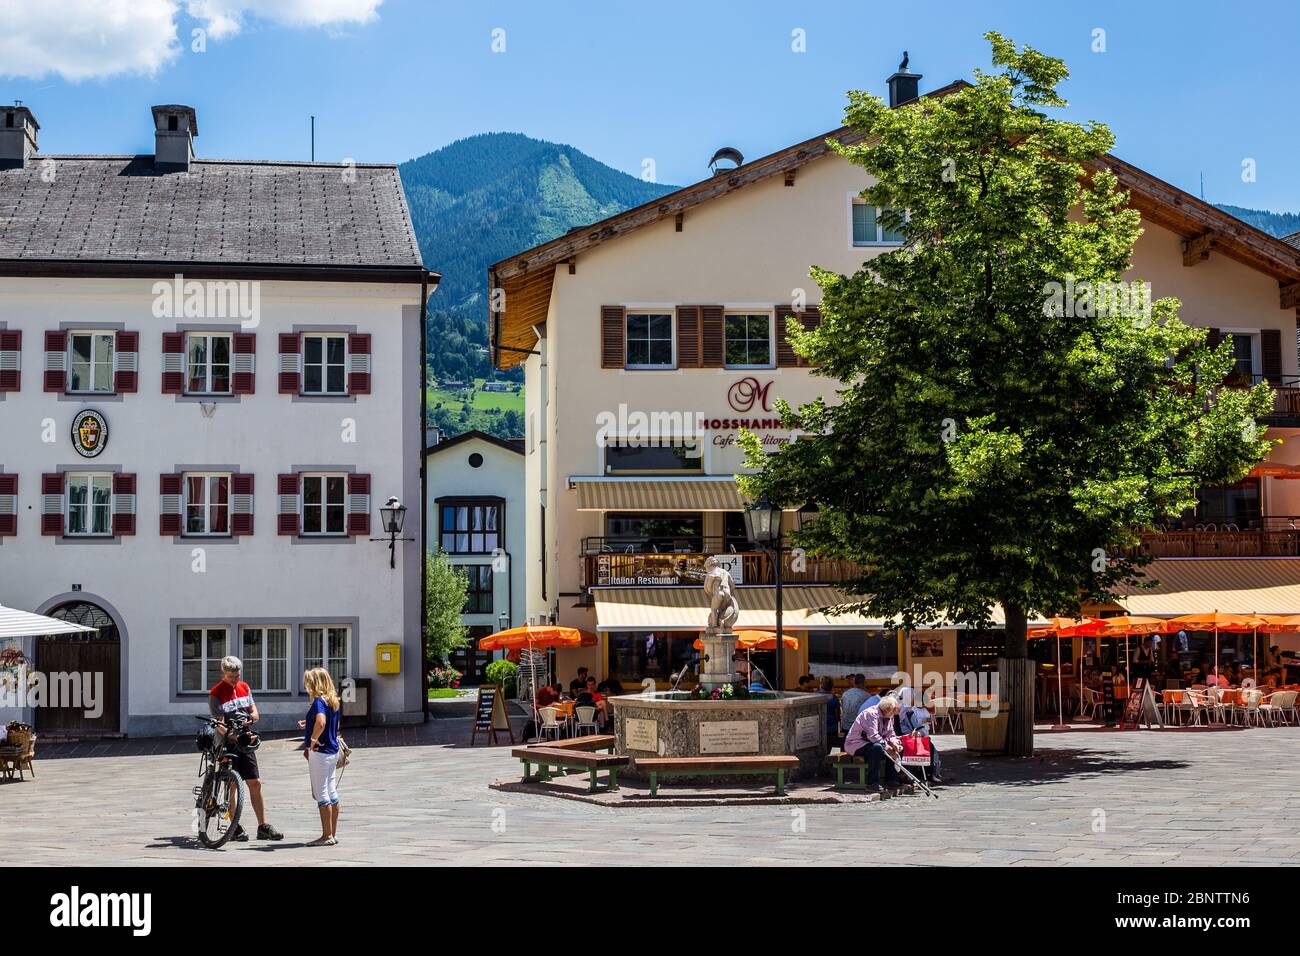 Zell am See, Austria - June 20, 2018: People Walking in the Old Town on a Summer Day Stock Photo